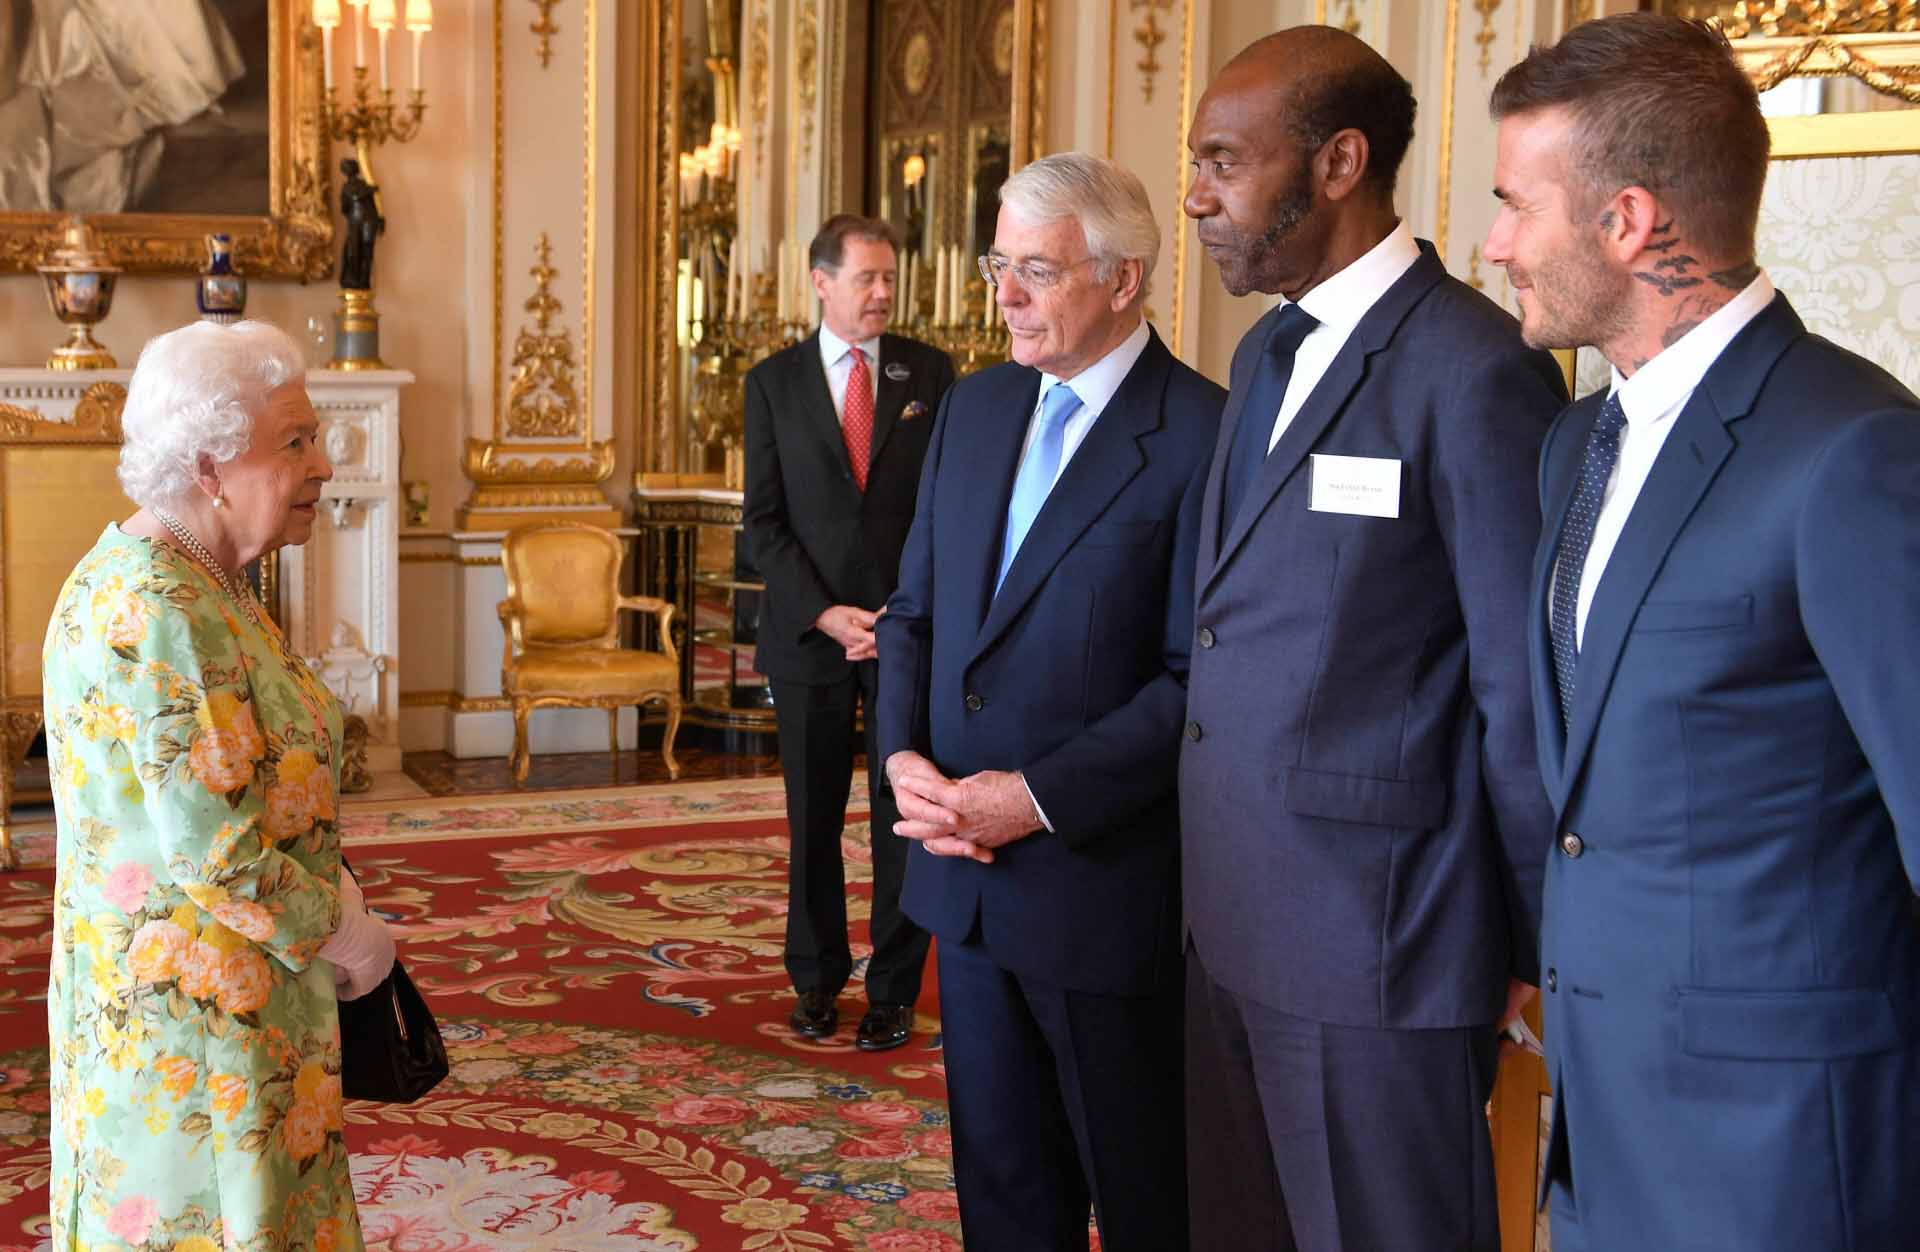 Queen Elizabeth II meets (left to right) Sir John Major, Sir Lenny Henry and David Beckham attend the Queen's Young Leaders Awards ceremony at BuckinghamPalace in London, Tuesday, June 26, 2018.  *** Local Caption *** .